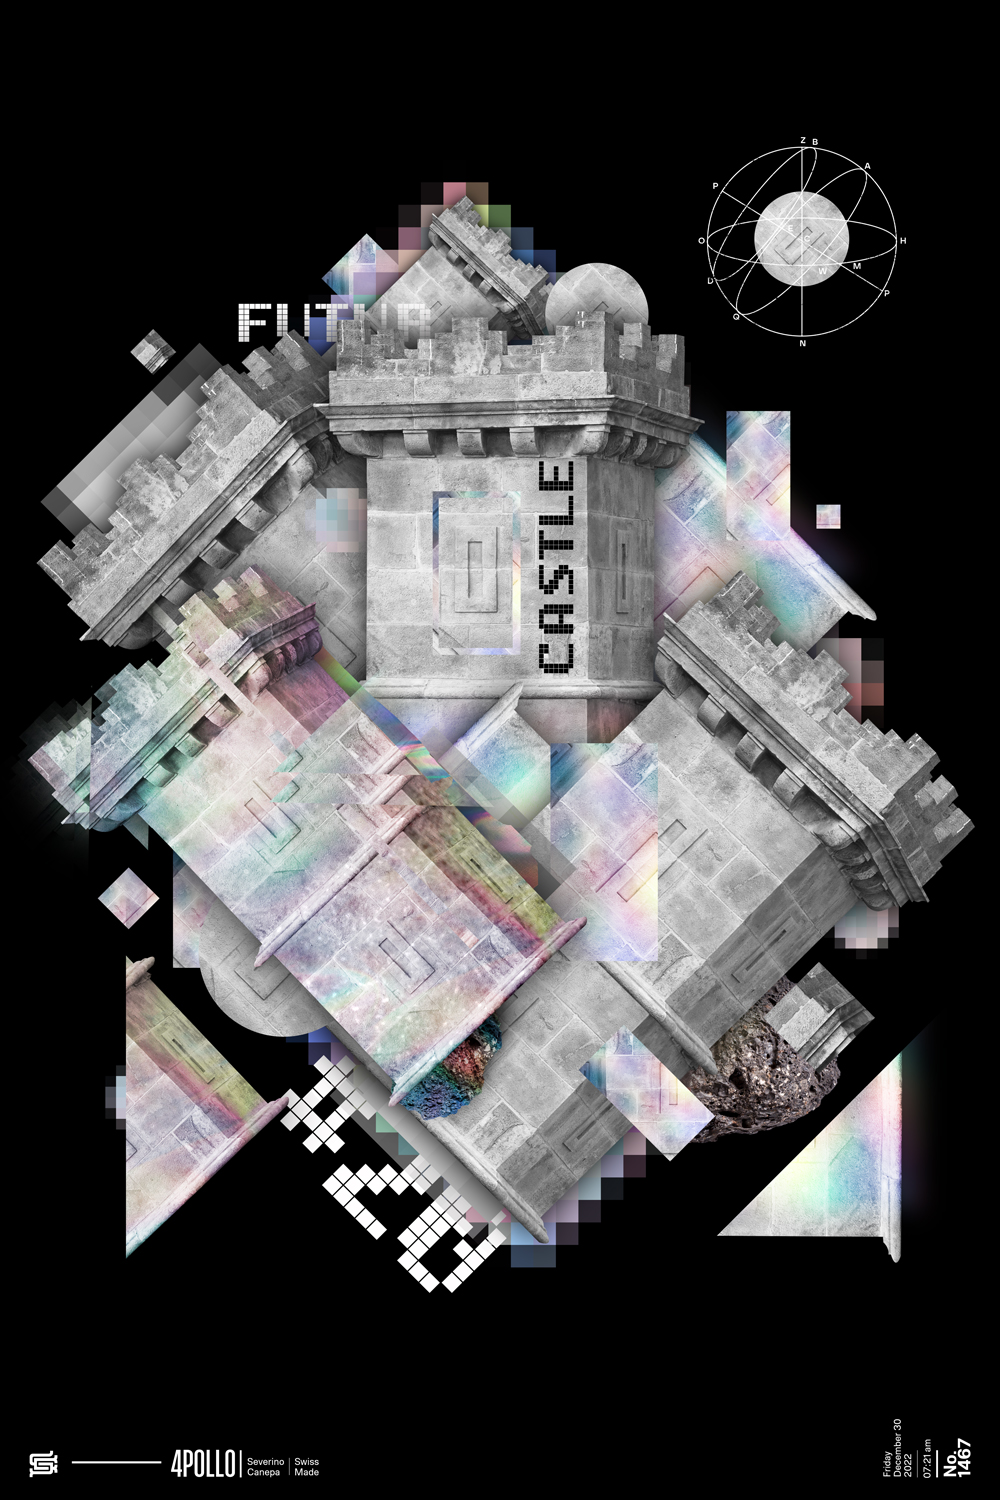 Digital artwork number 20 made with the photograph of a tower, mosaic effects, and holographic paper